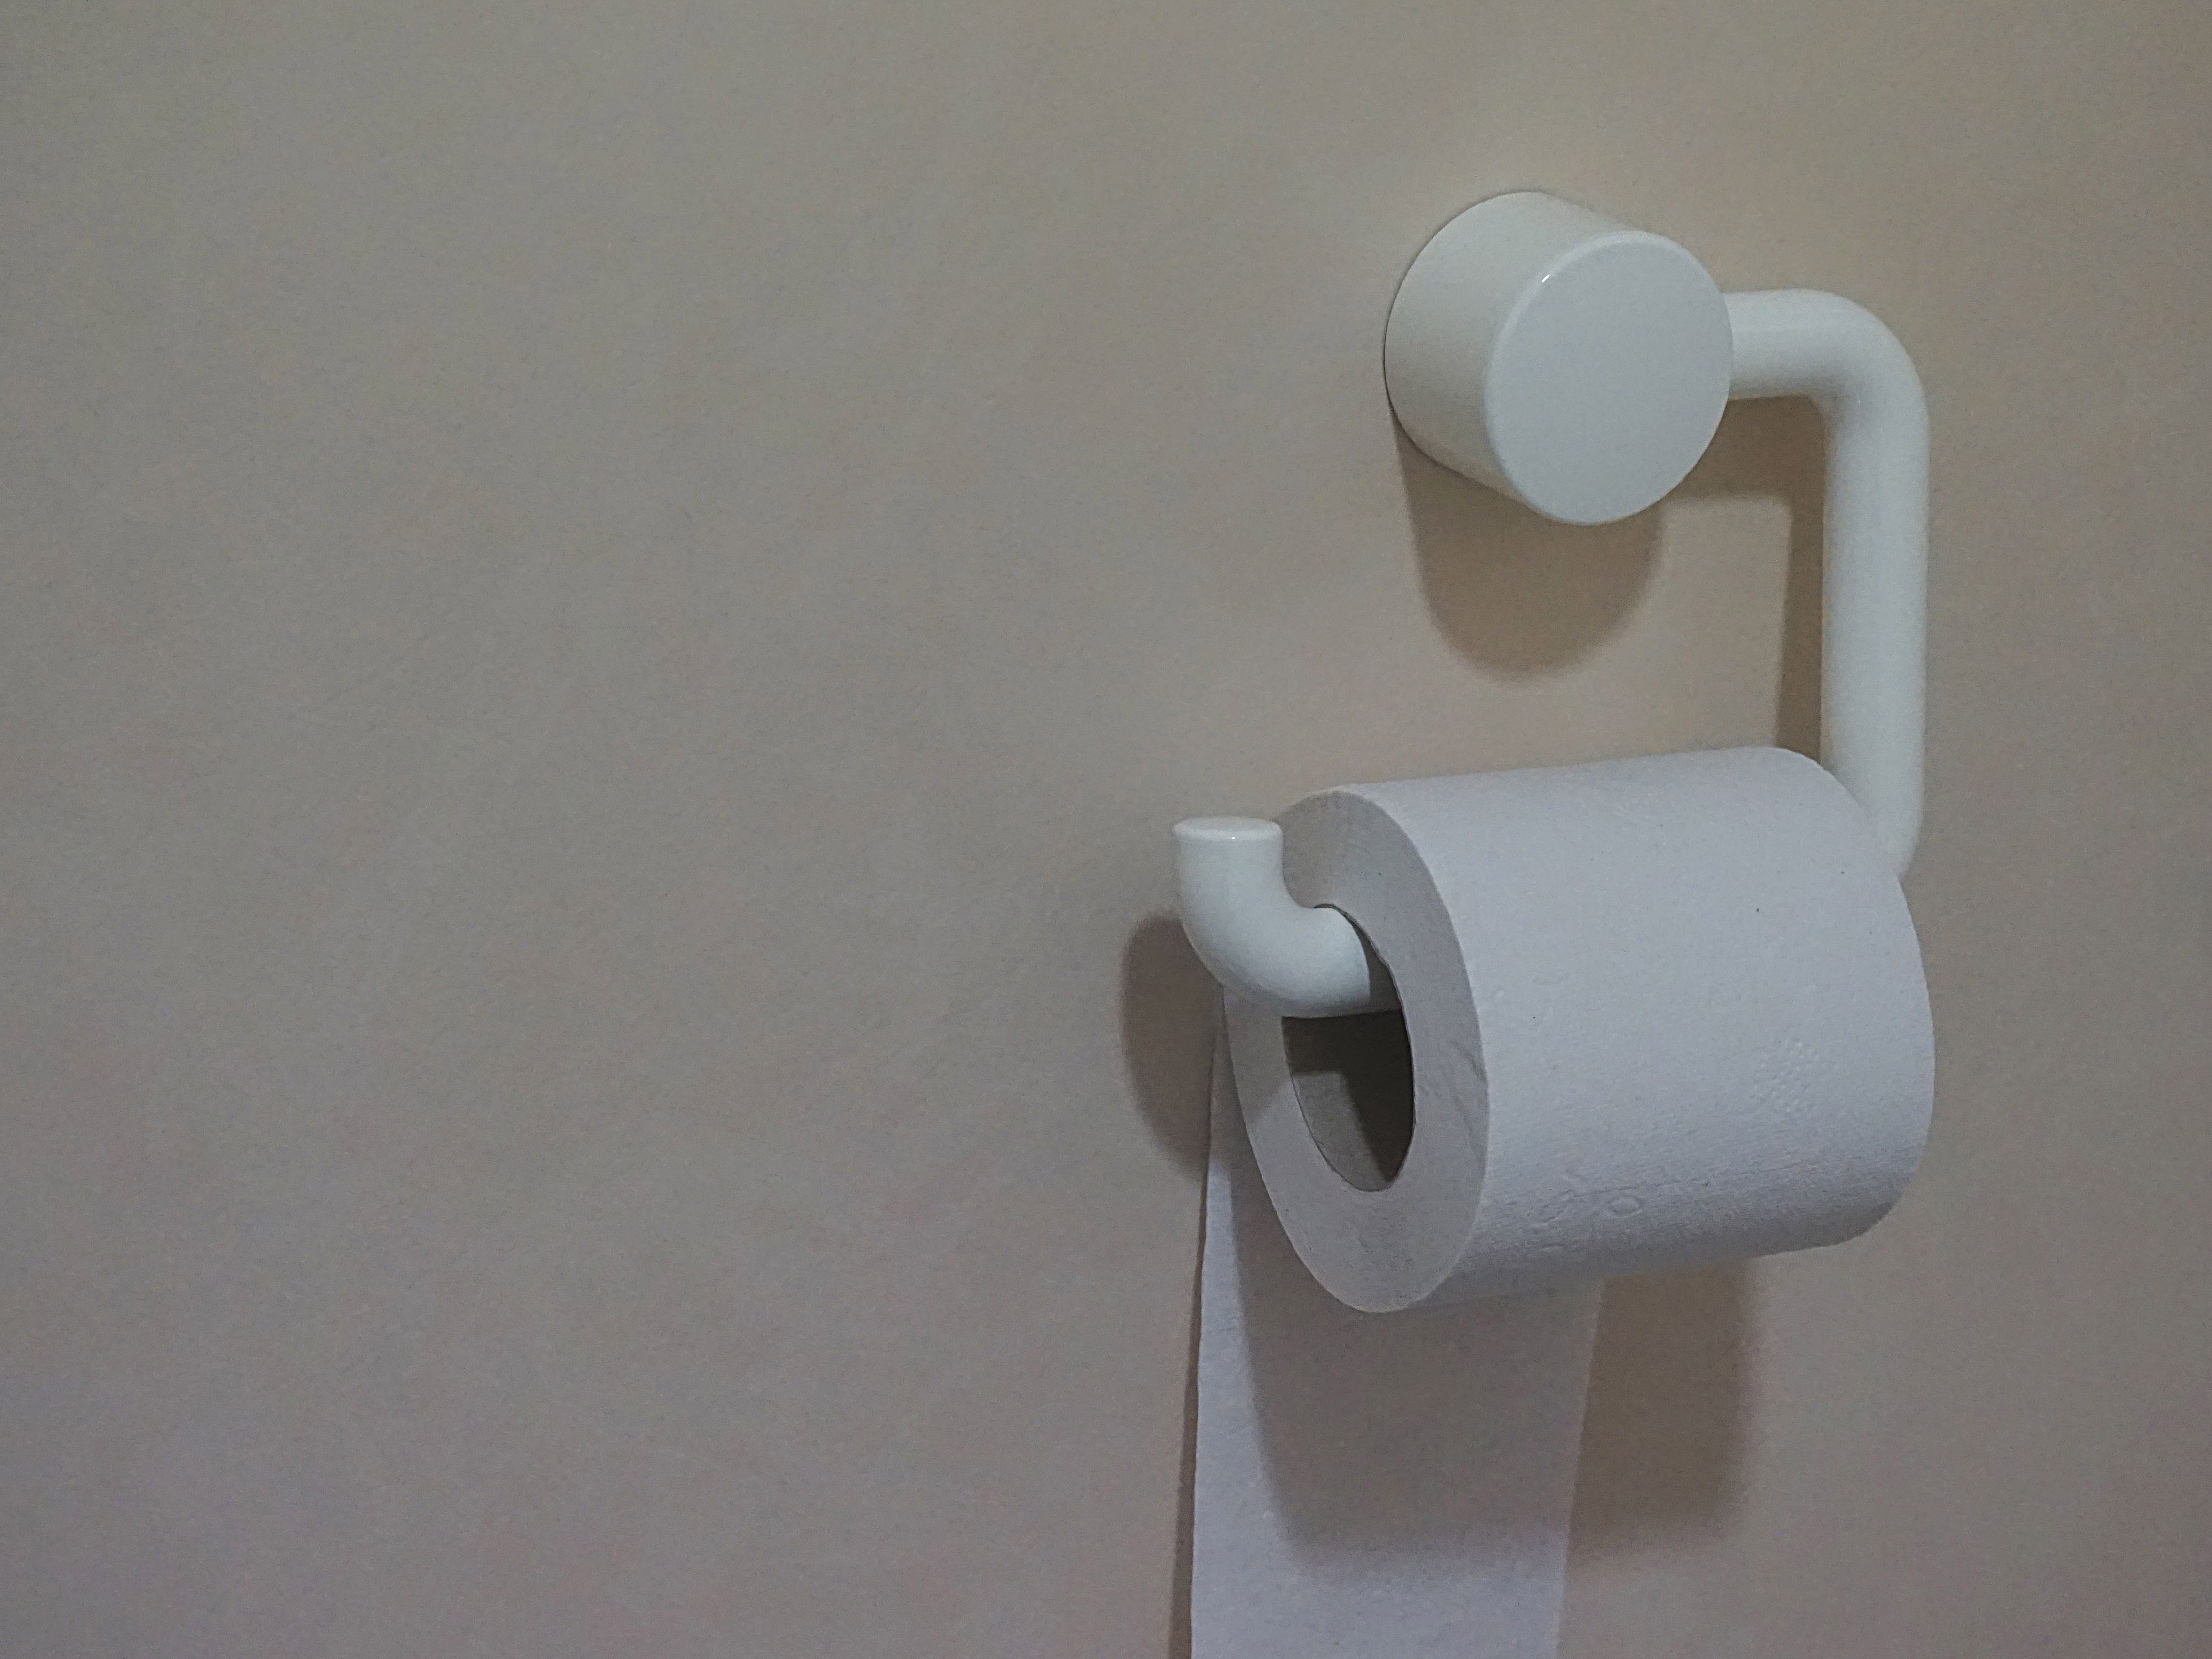 Photo of toiler paper hanging off the roll